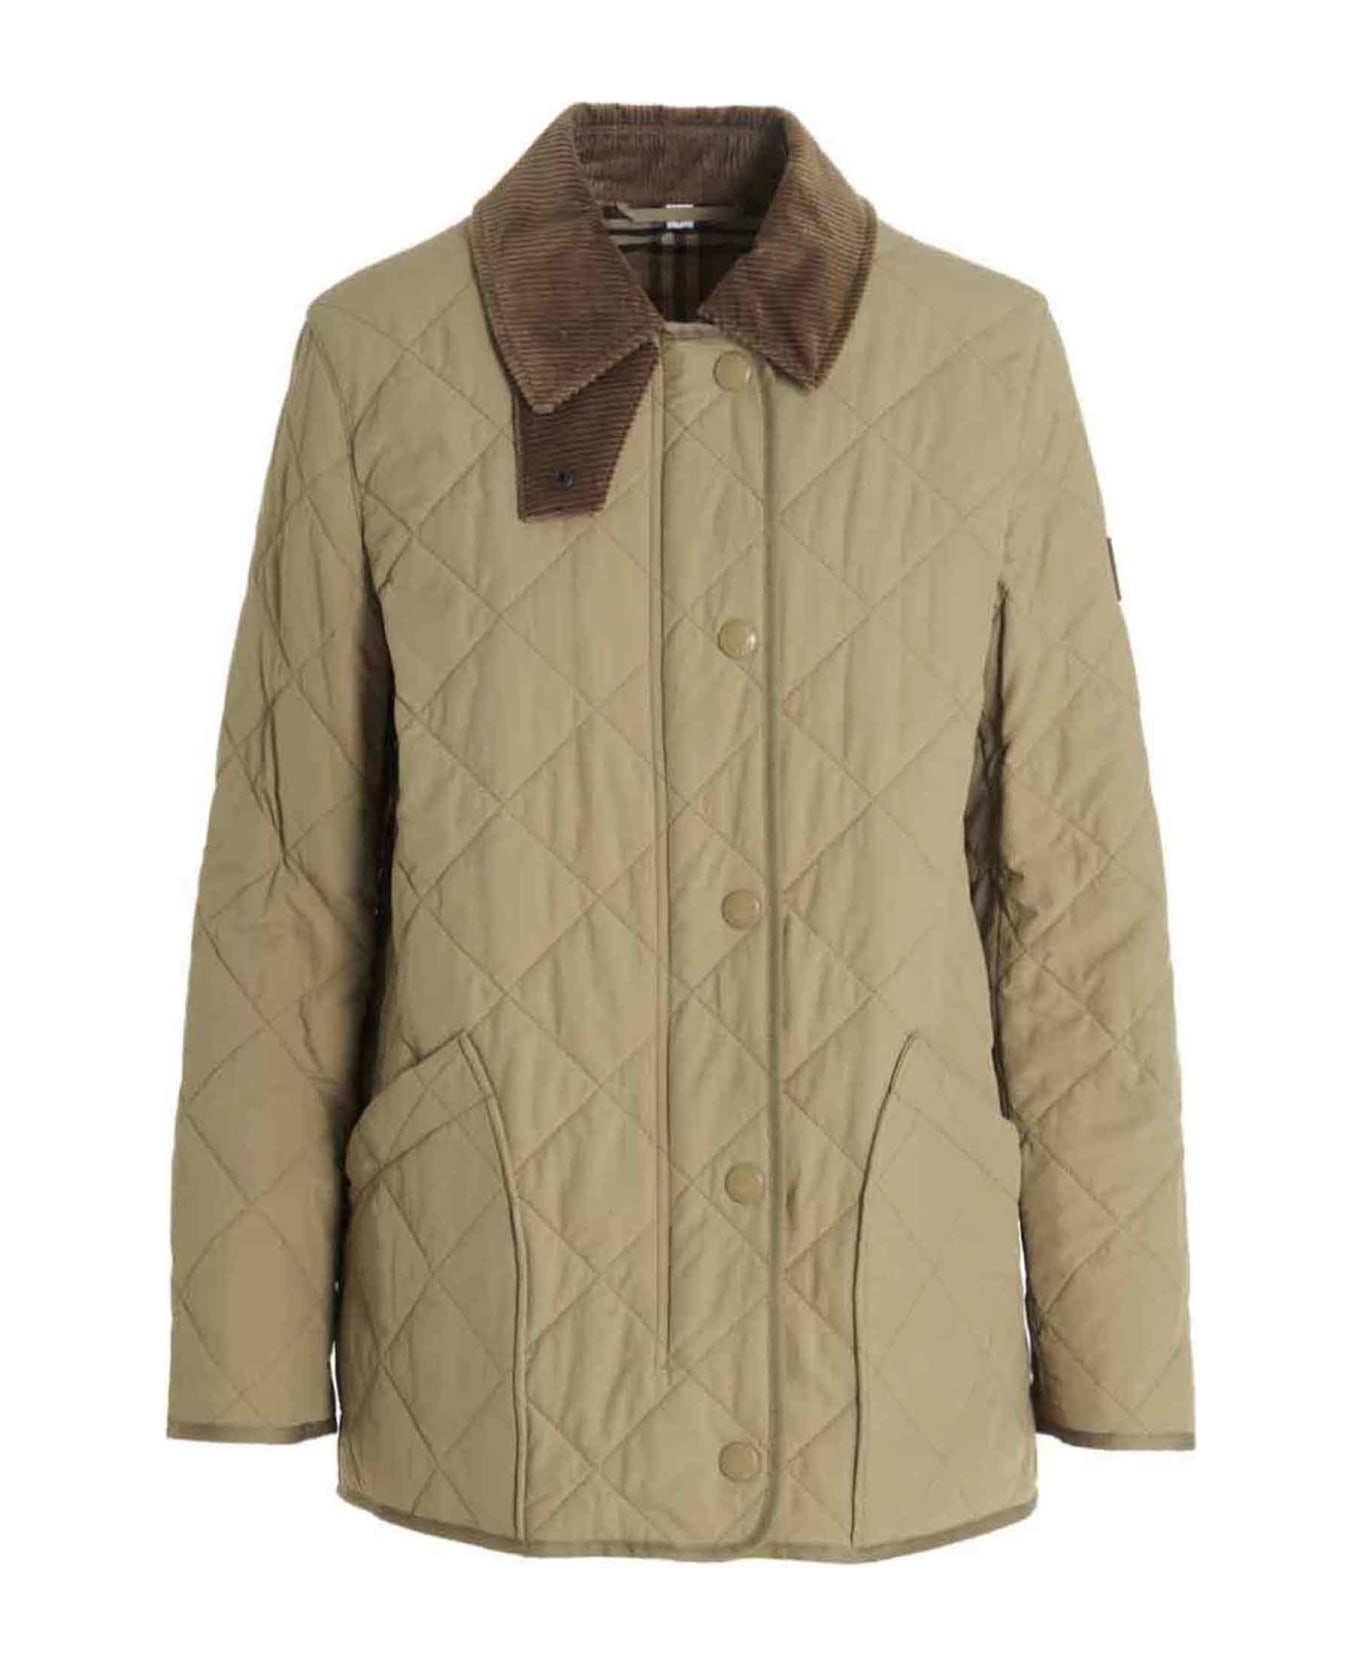 Burberry Quilted Jacket - Honey コート